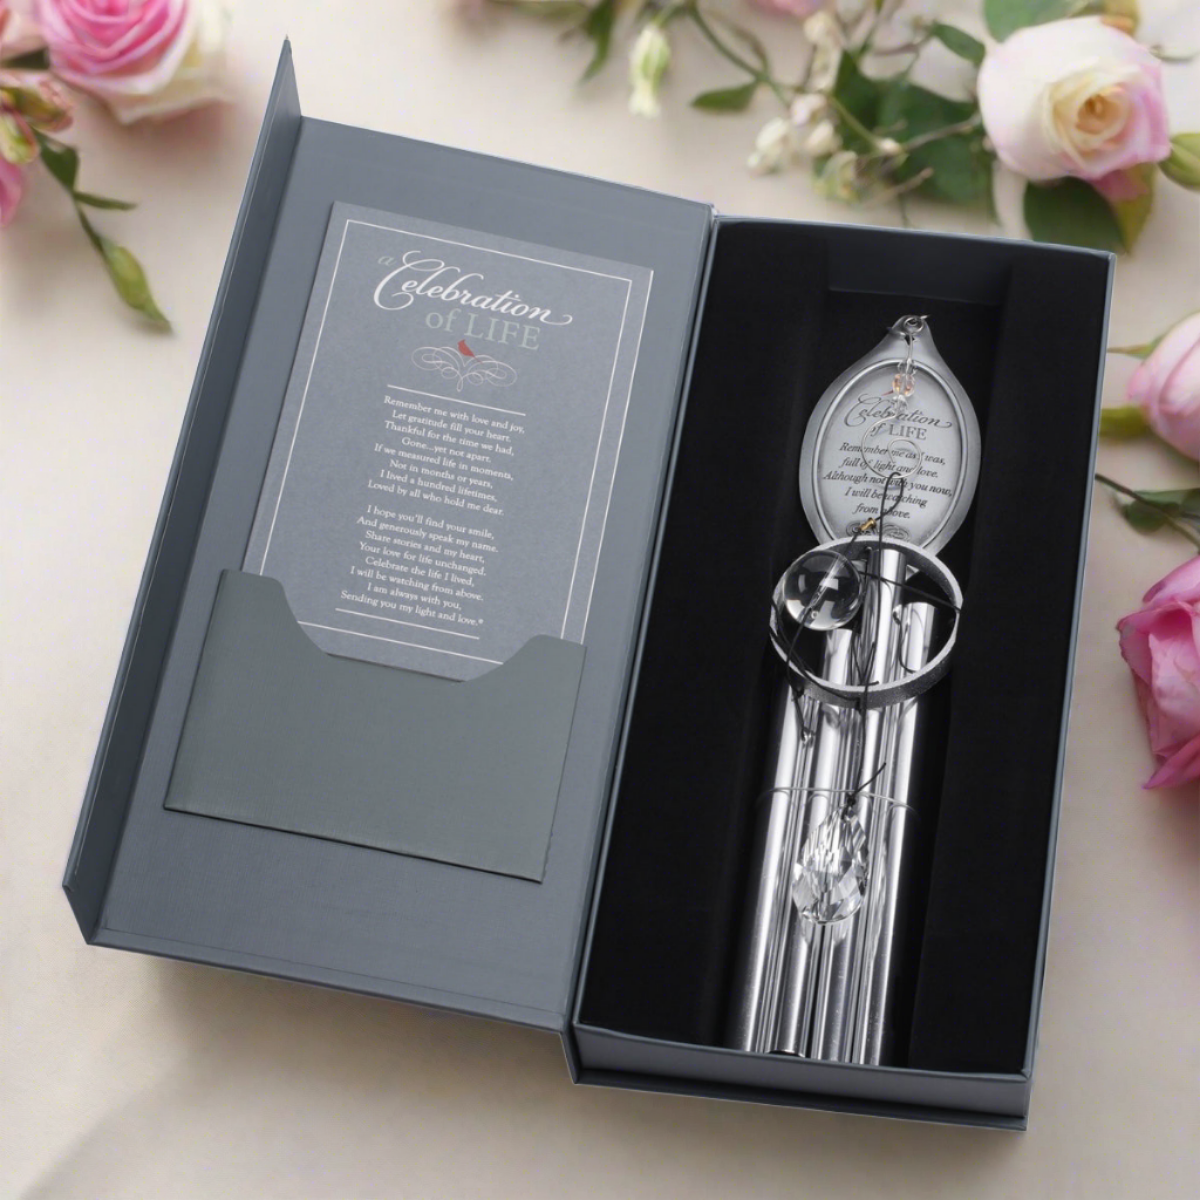 The windchime comes nestled in a high quality box with a Celebration of Life card.